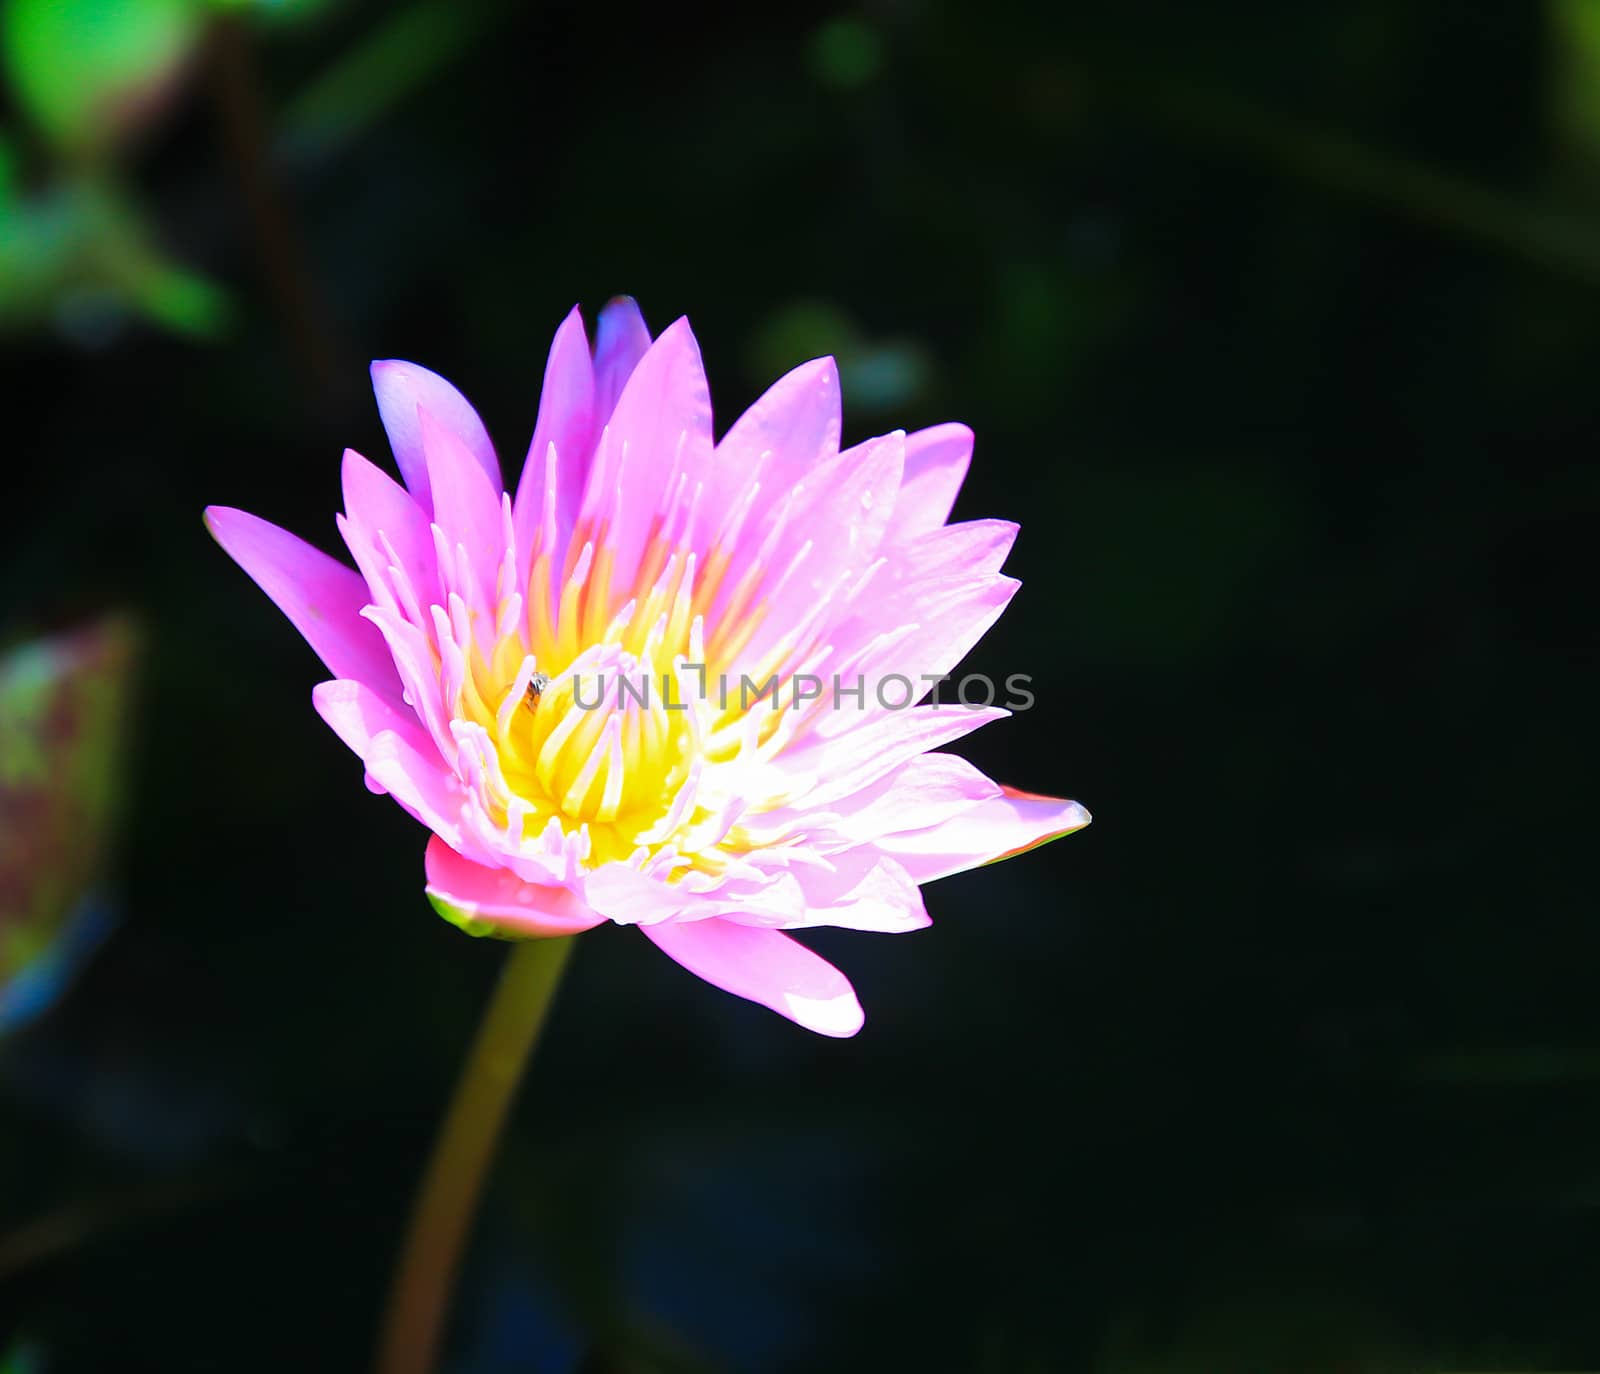 Pink lotus and the sunny outdoor environment.